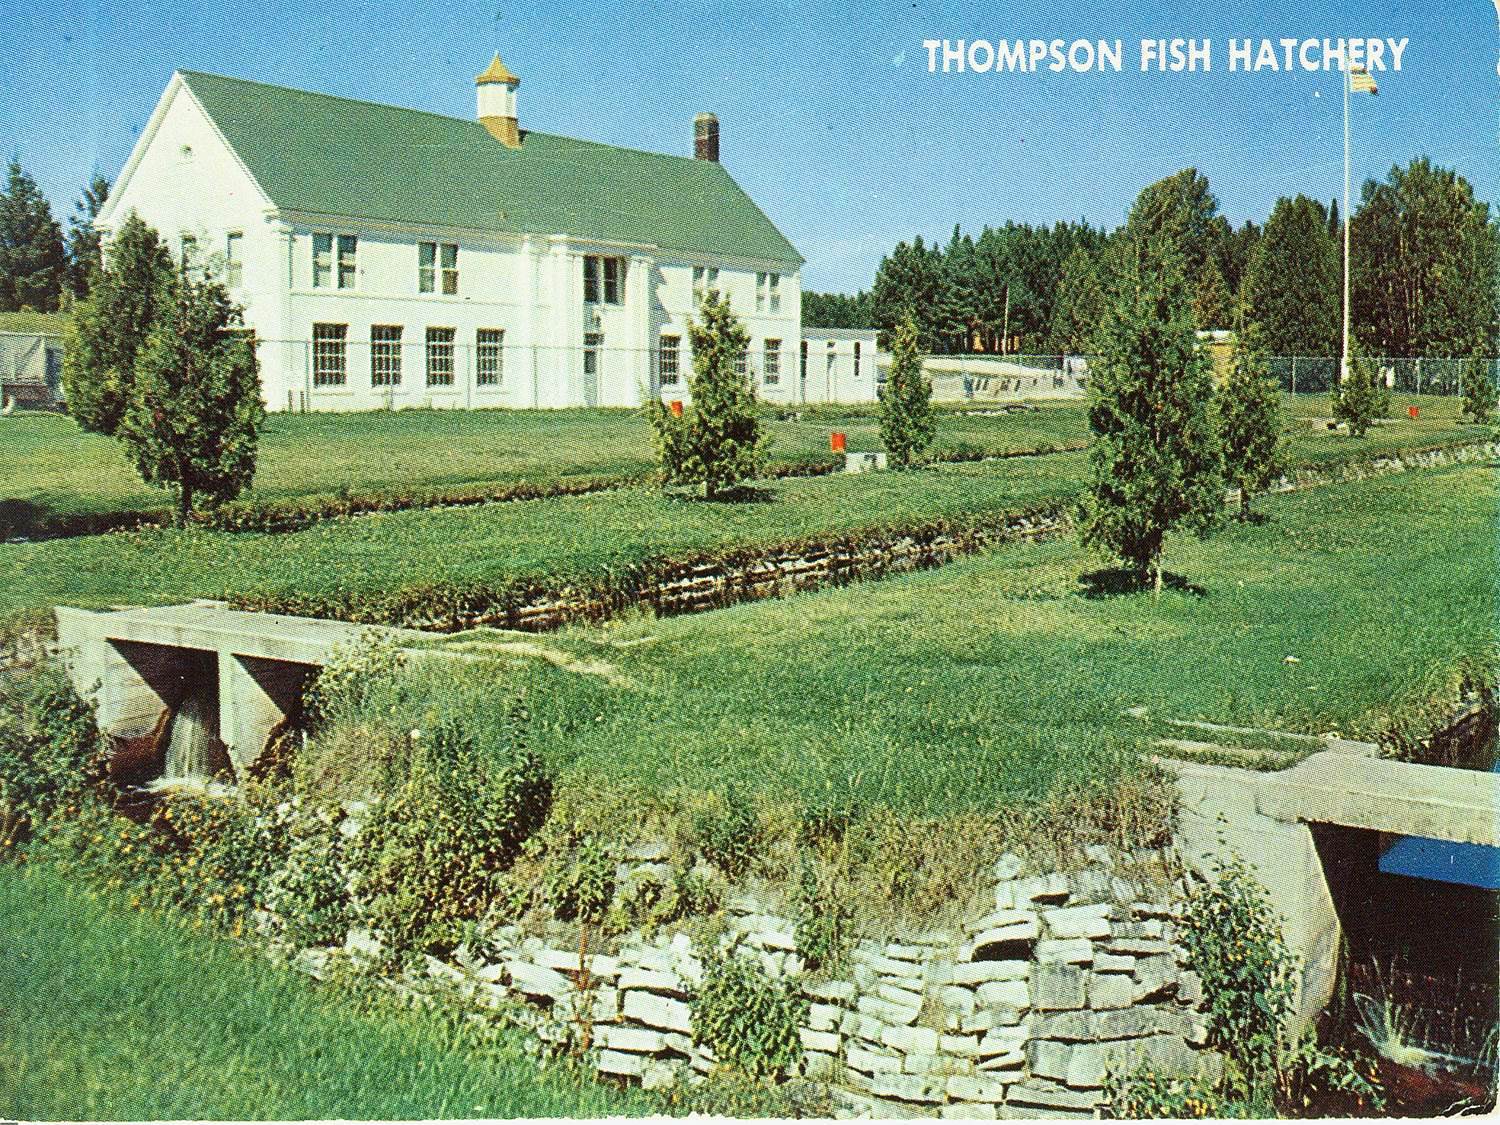 A colorful postcard, circa 1950, shows the former Thompson State Fish Hatchery west of Manistique.